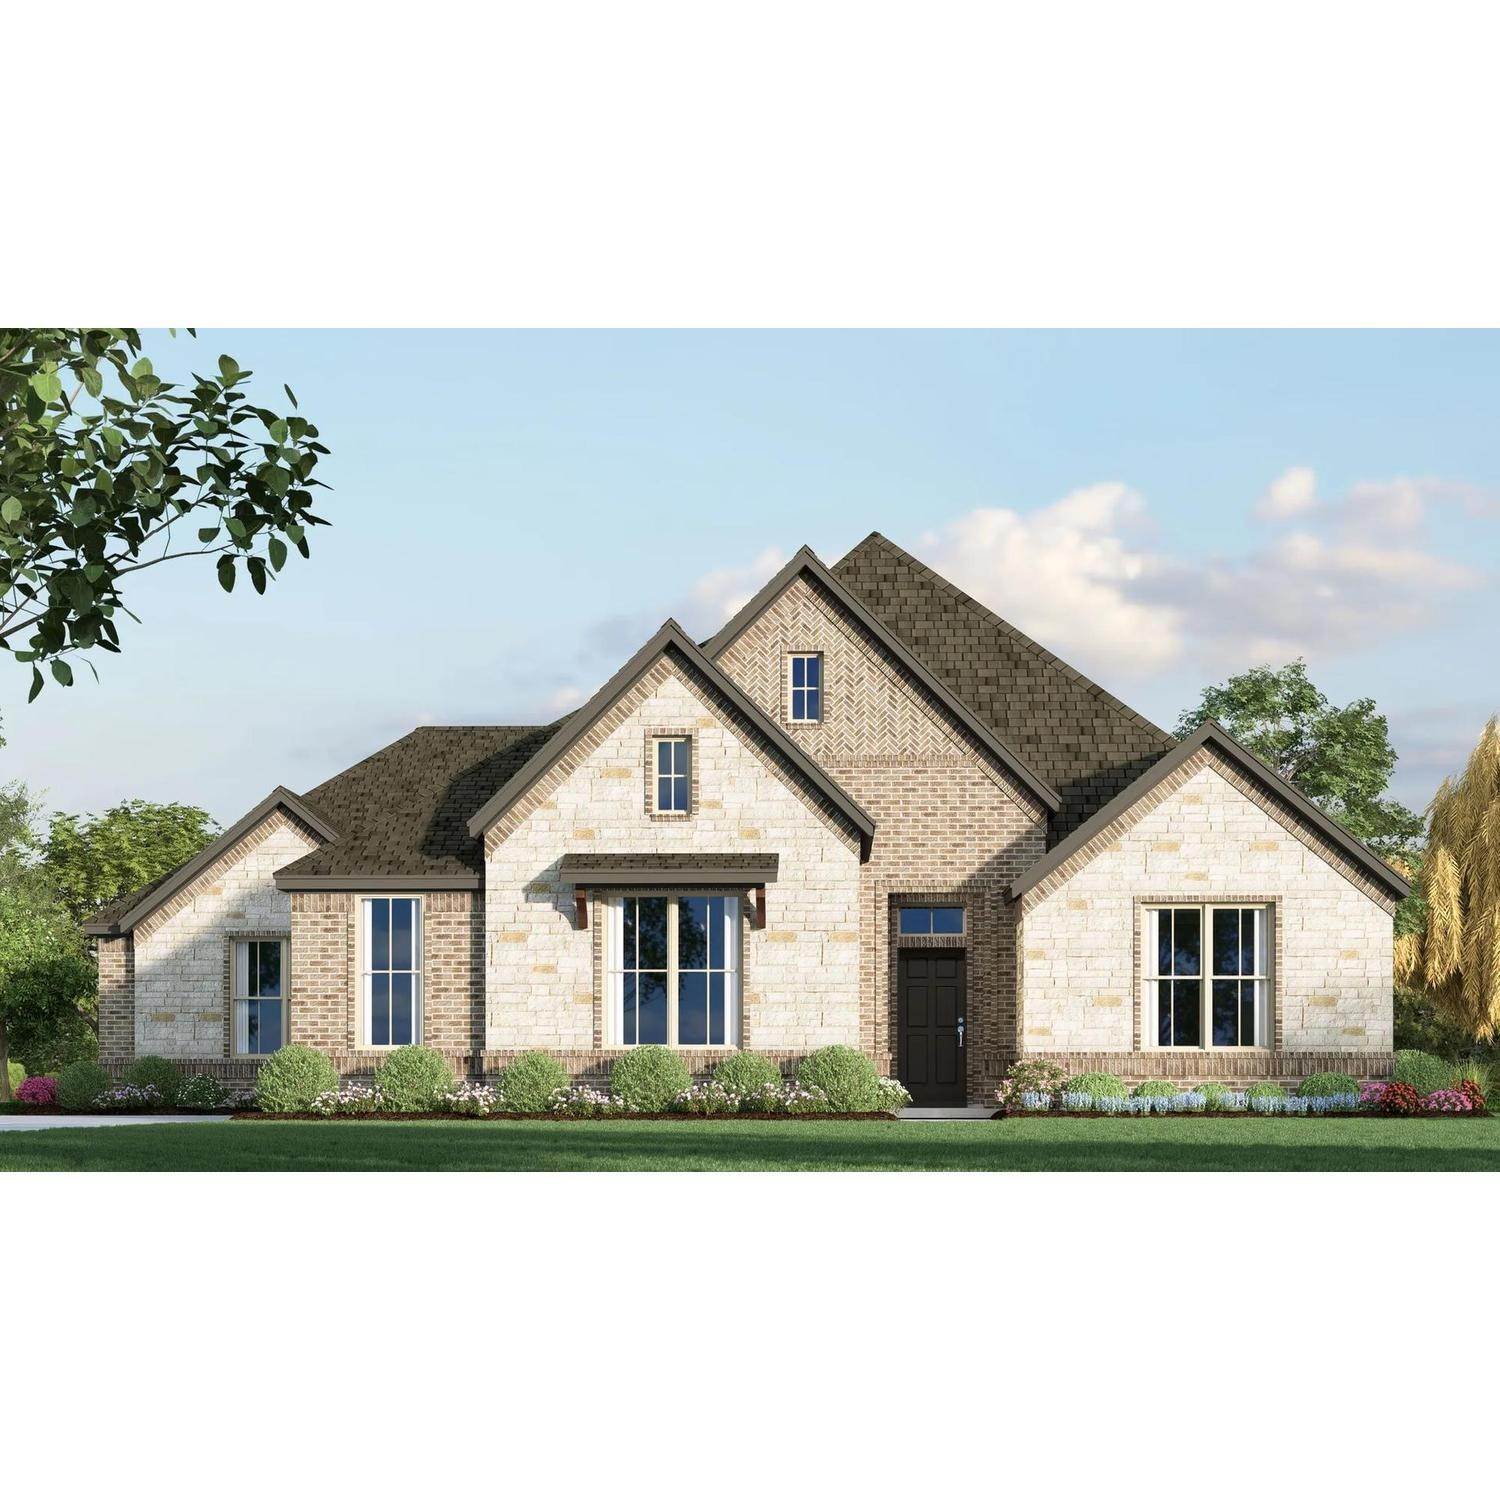 Single Family for Sale at Godley, TX 76044